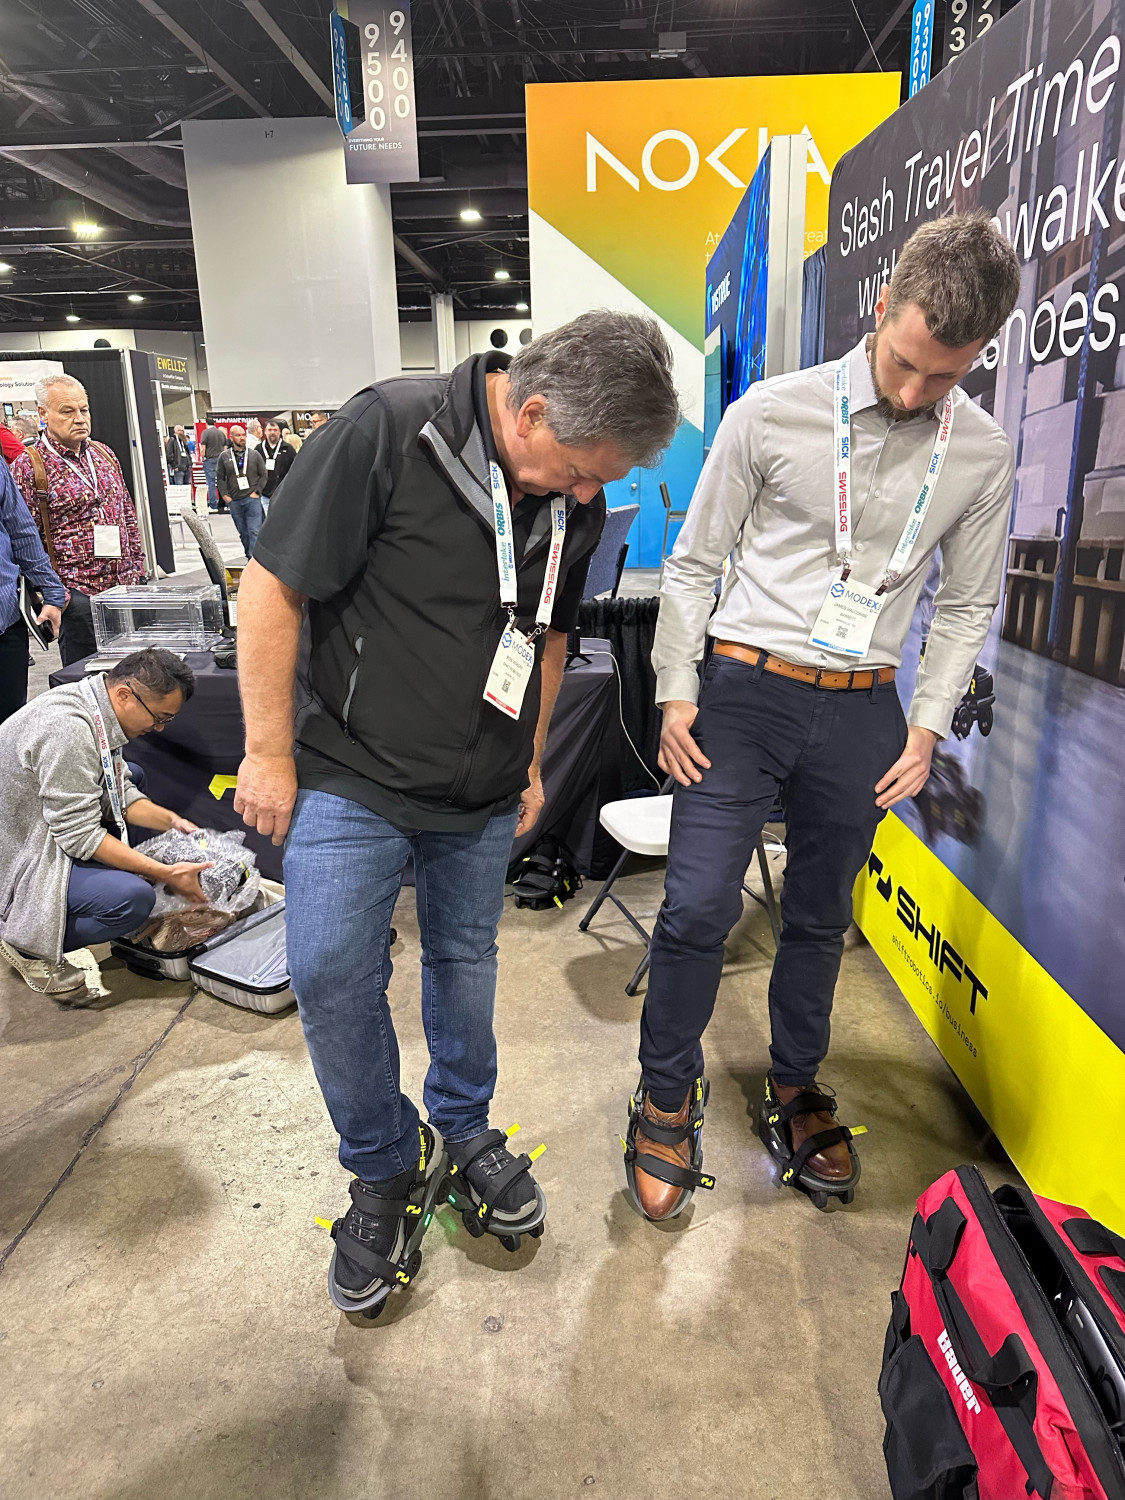 From left, Rob Vickery, global head of business development at Shift Robotics (Booth A9422), demonstrates how to operate their Moonwalkers. Powered by artificial intelligence (AI), Moonwalkers can be strapped onto shoes to give warehouse workers a gentle motorized push. Shift Robotics says the product can double warehouse productivity, thanks to fewer steps taken.